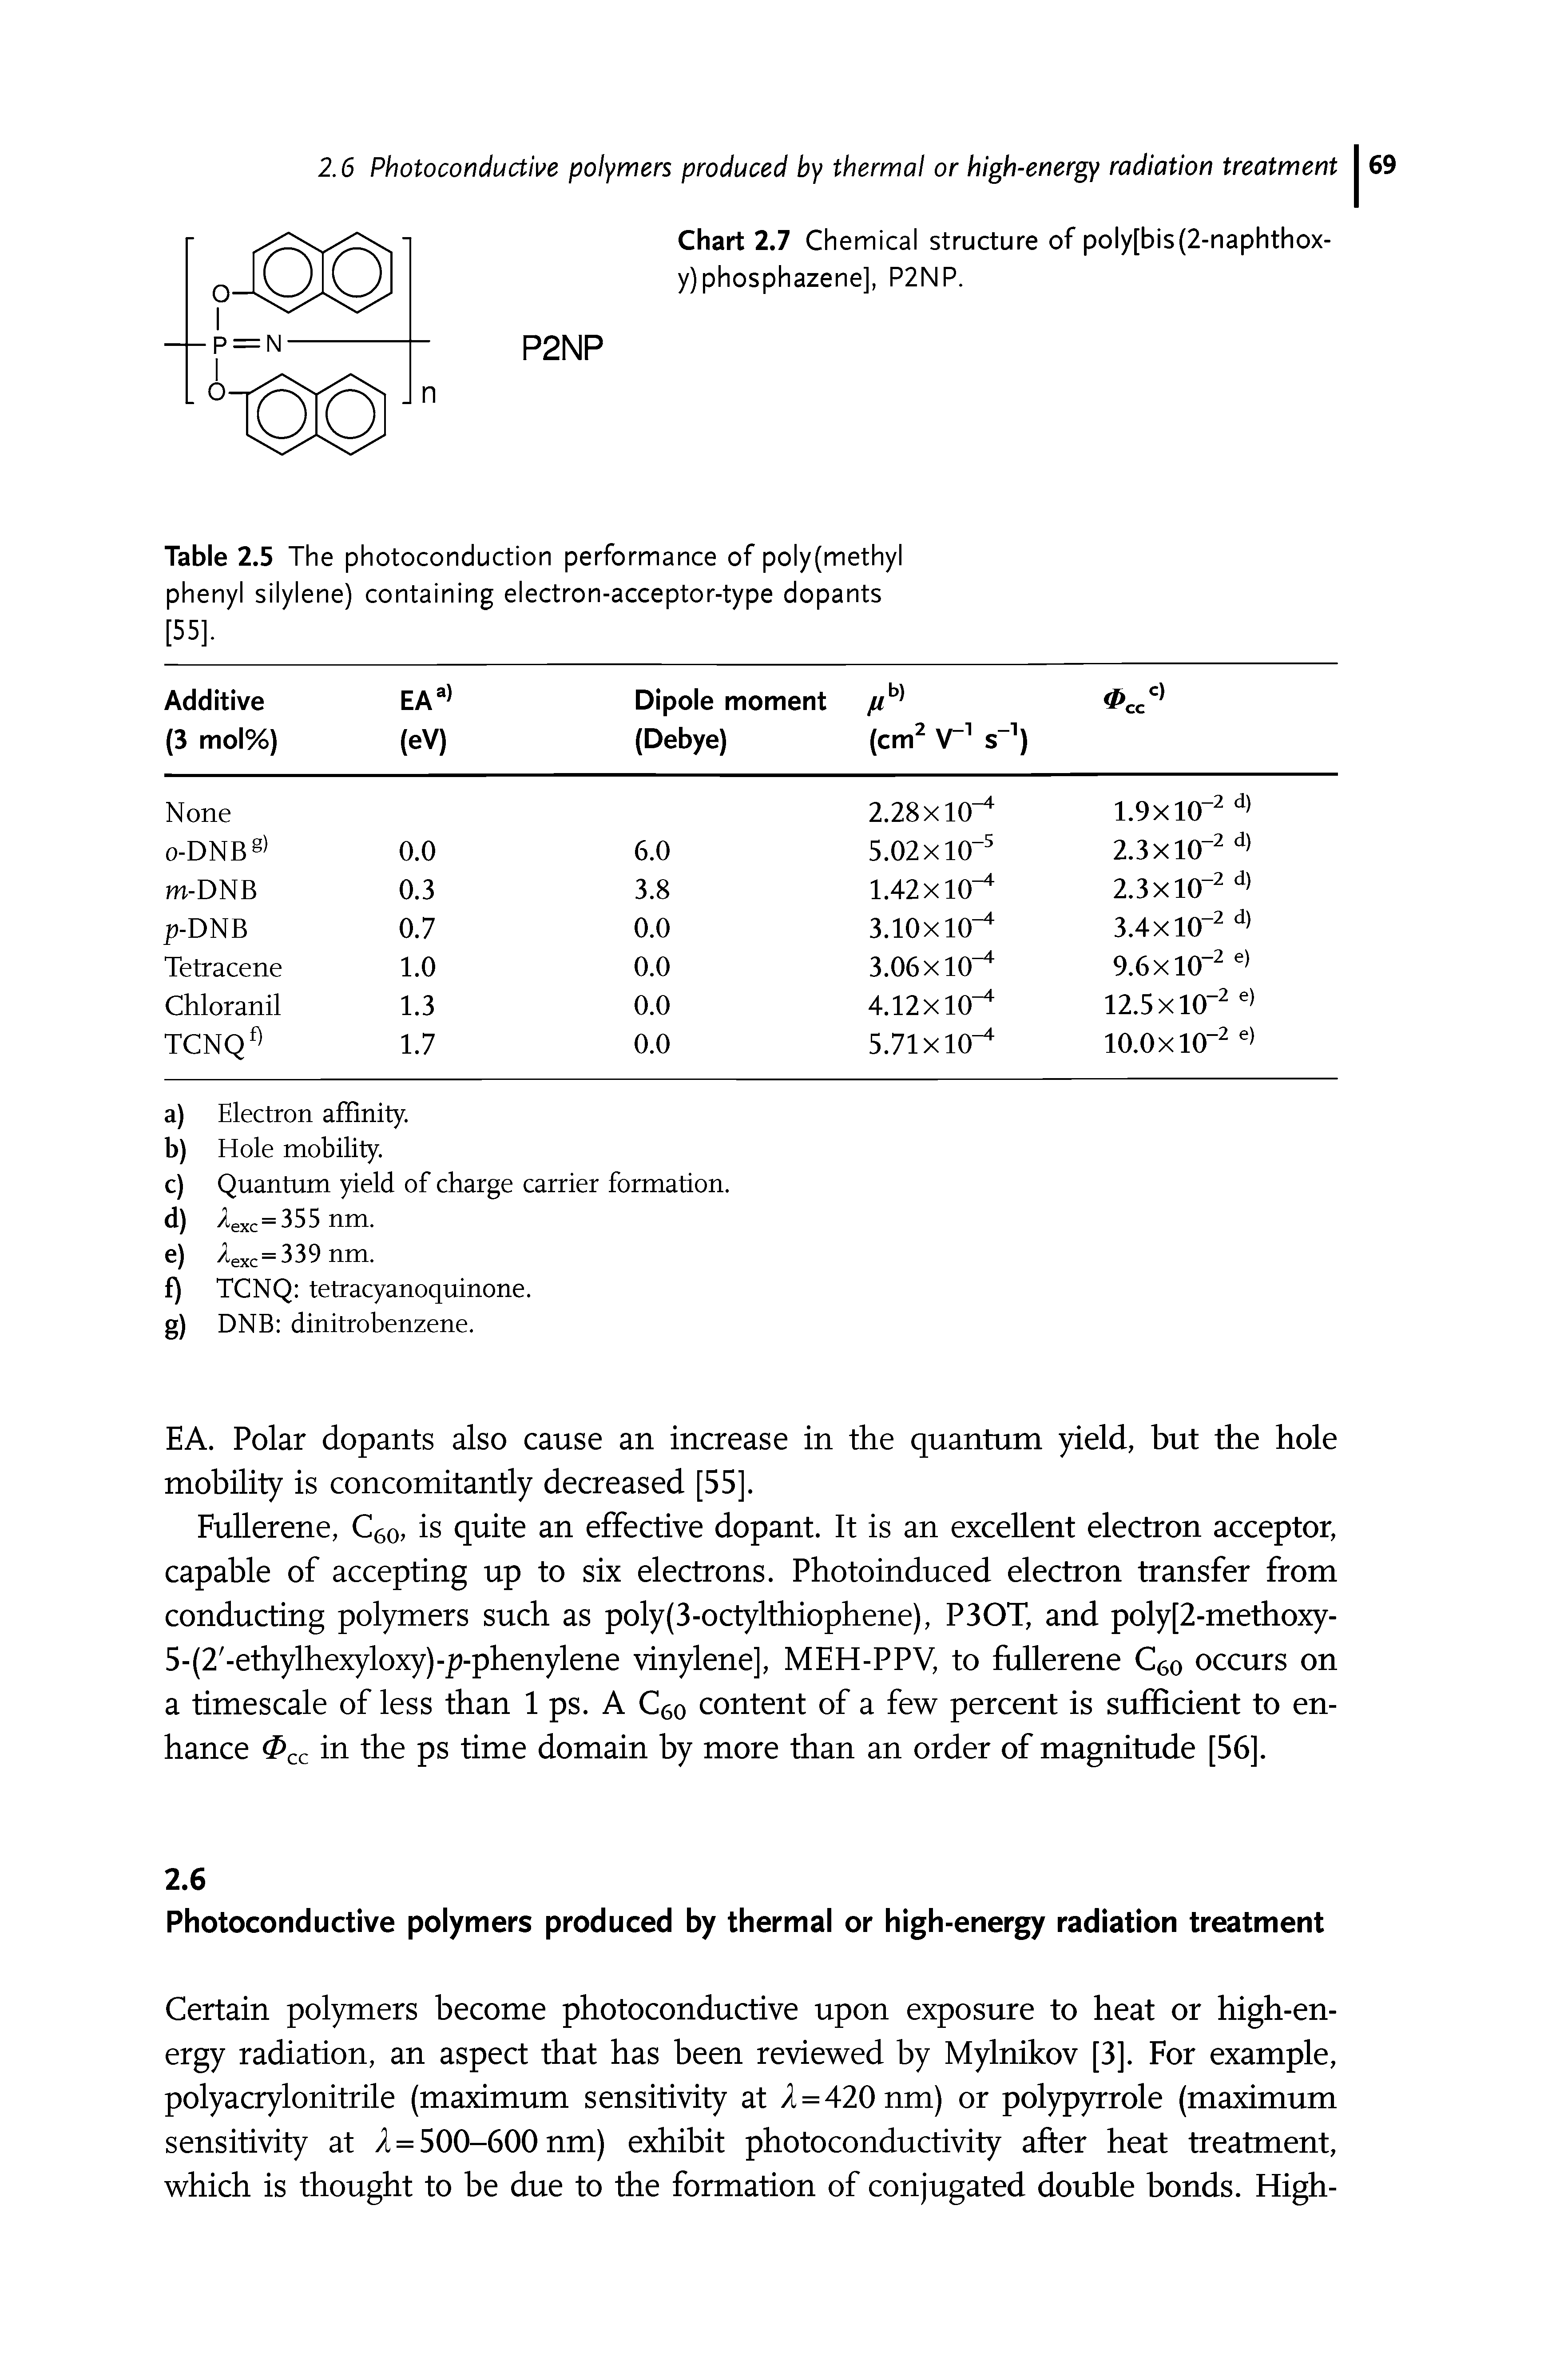 Table 2.5 The photoconduction performance of poly(methyl phenyl silylene) containing electron-acceptor-type dopants [55].